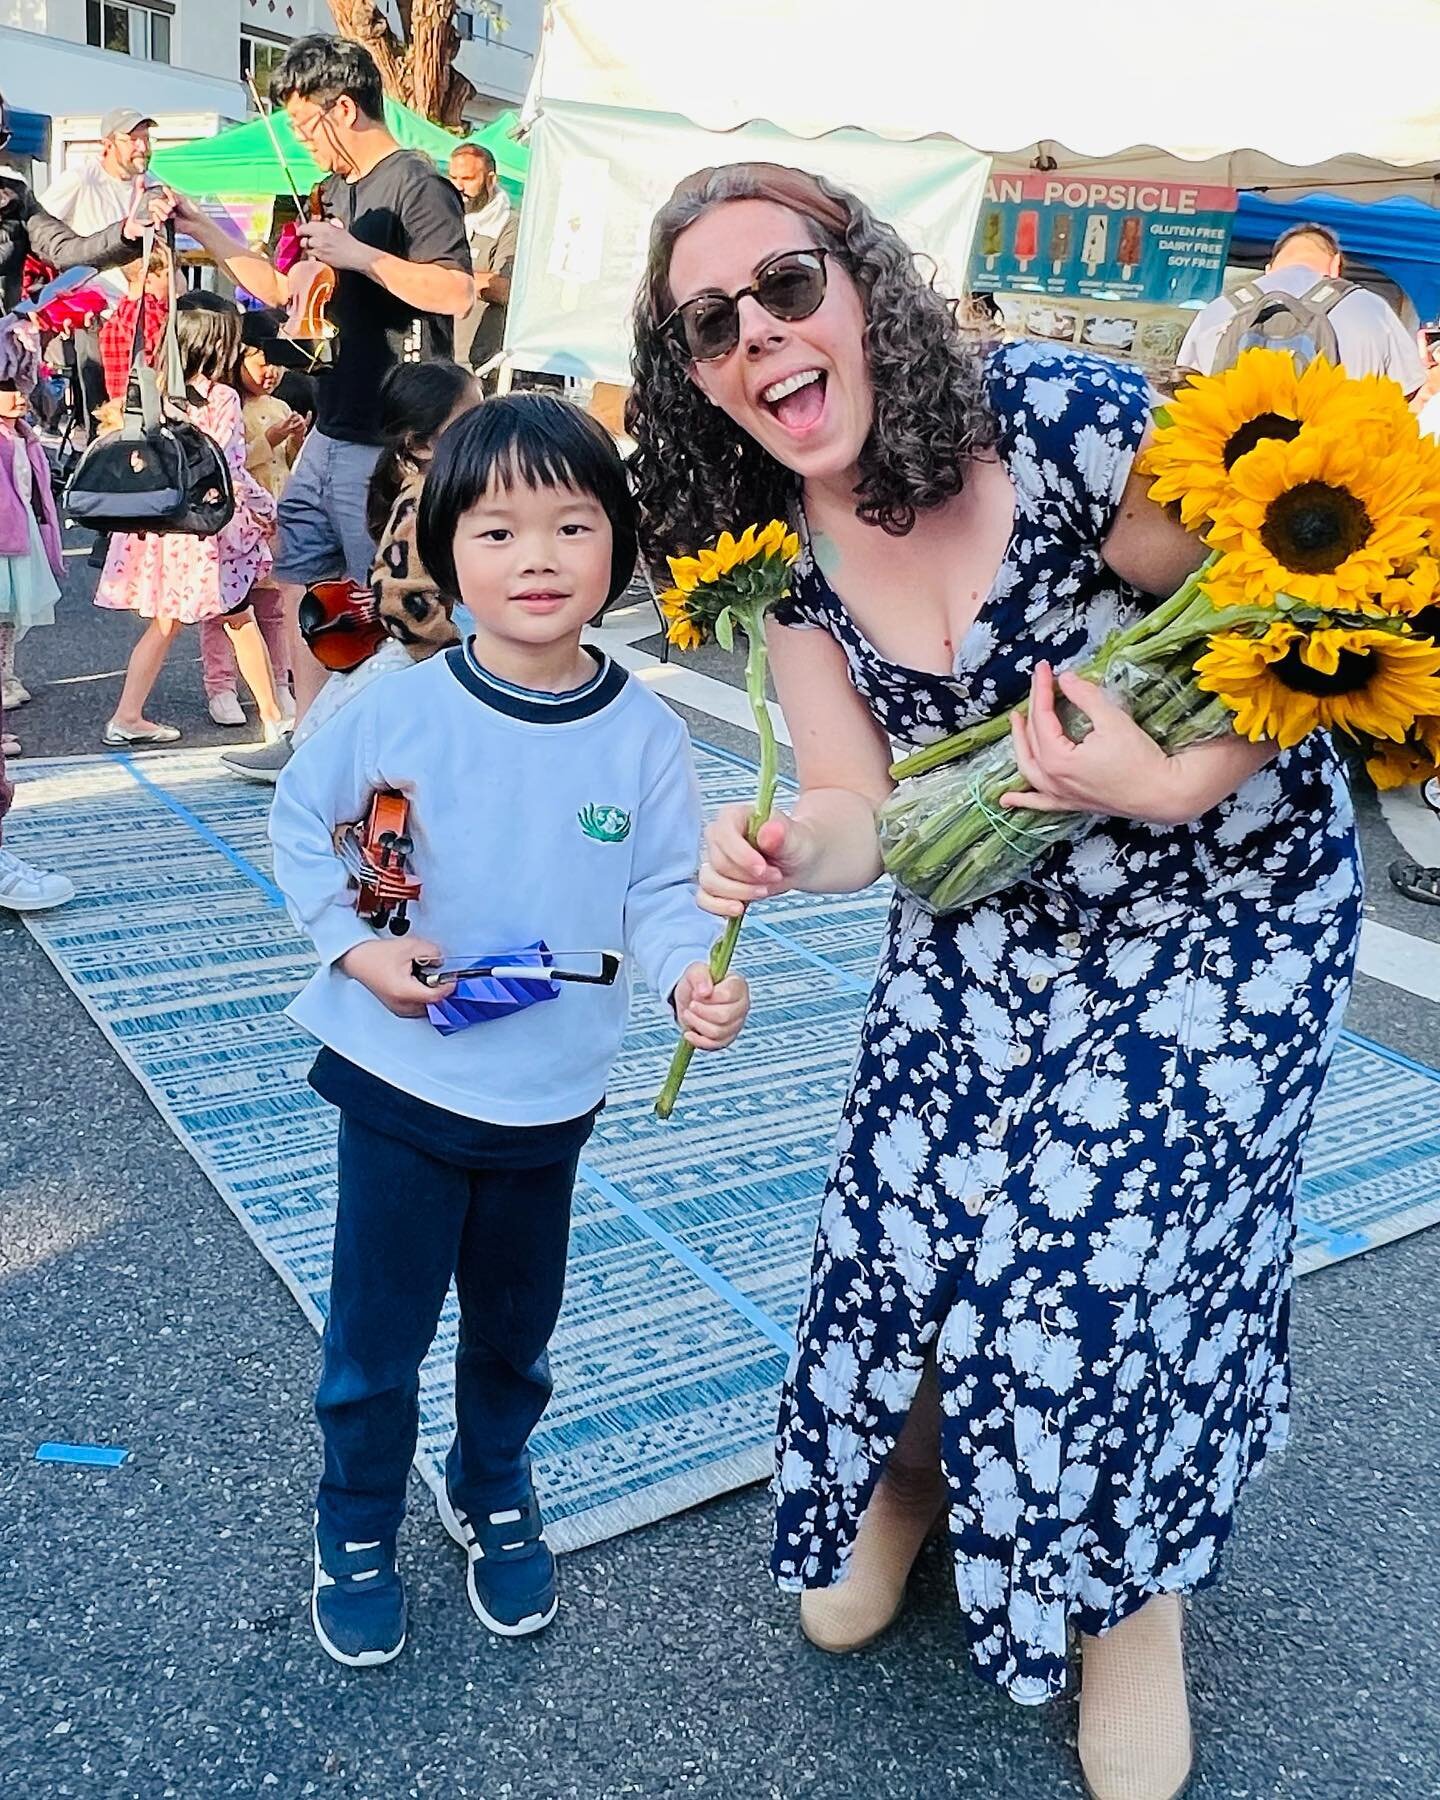 Catch a glimpse of the fun we&rsquo;re having at Group Class in our end of year concert at the South Pasadena Farmer&rsquo;s Market! 

#violin #violinlessons #suzuki #suzukiviolin